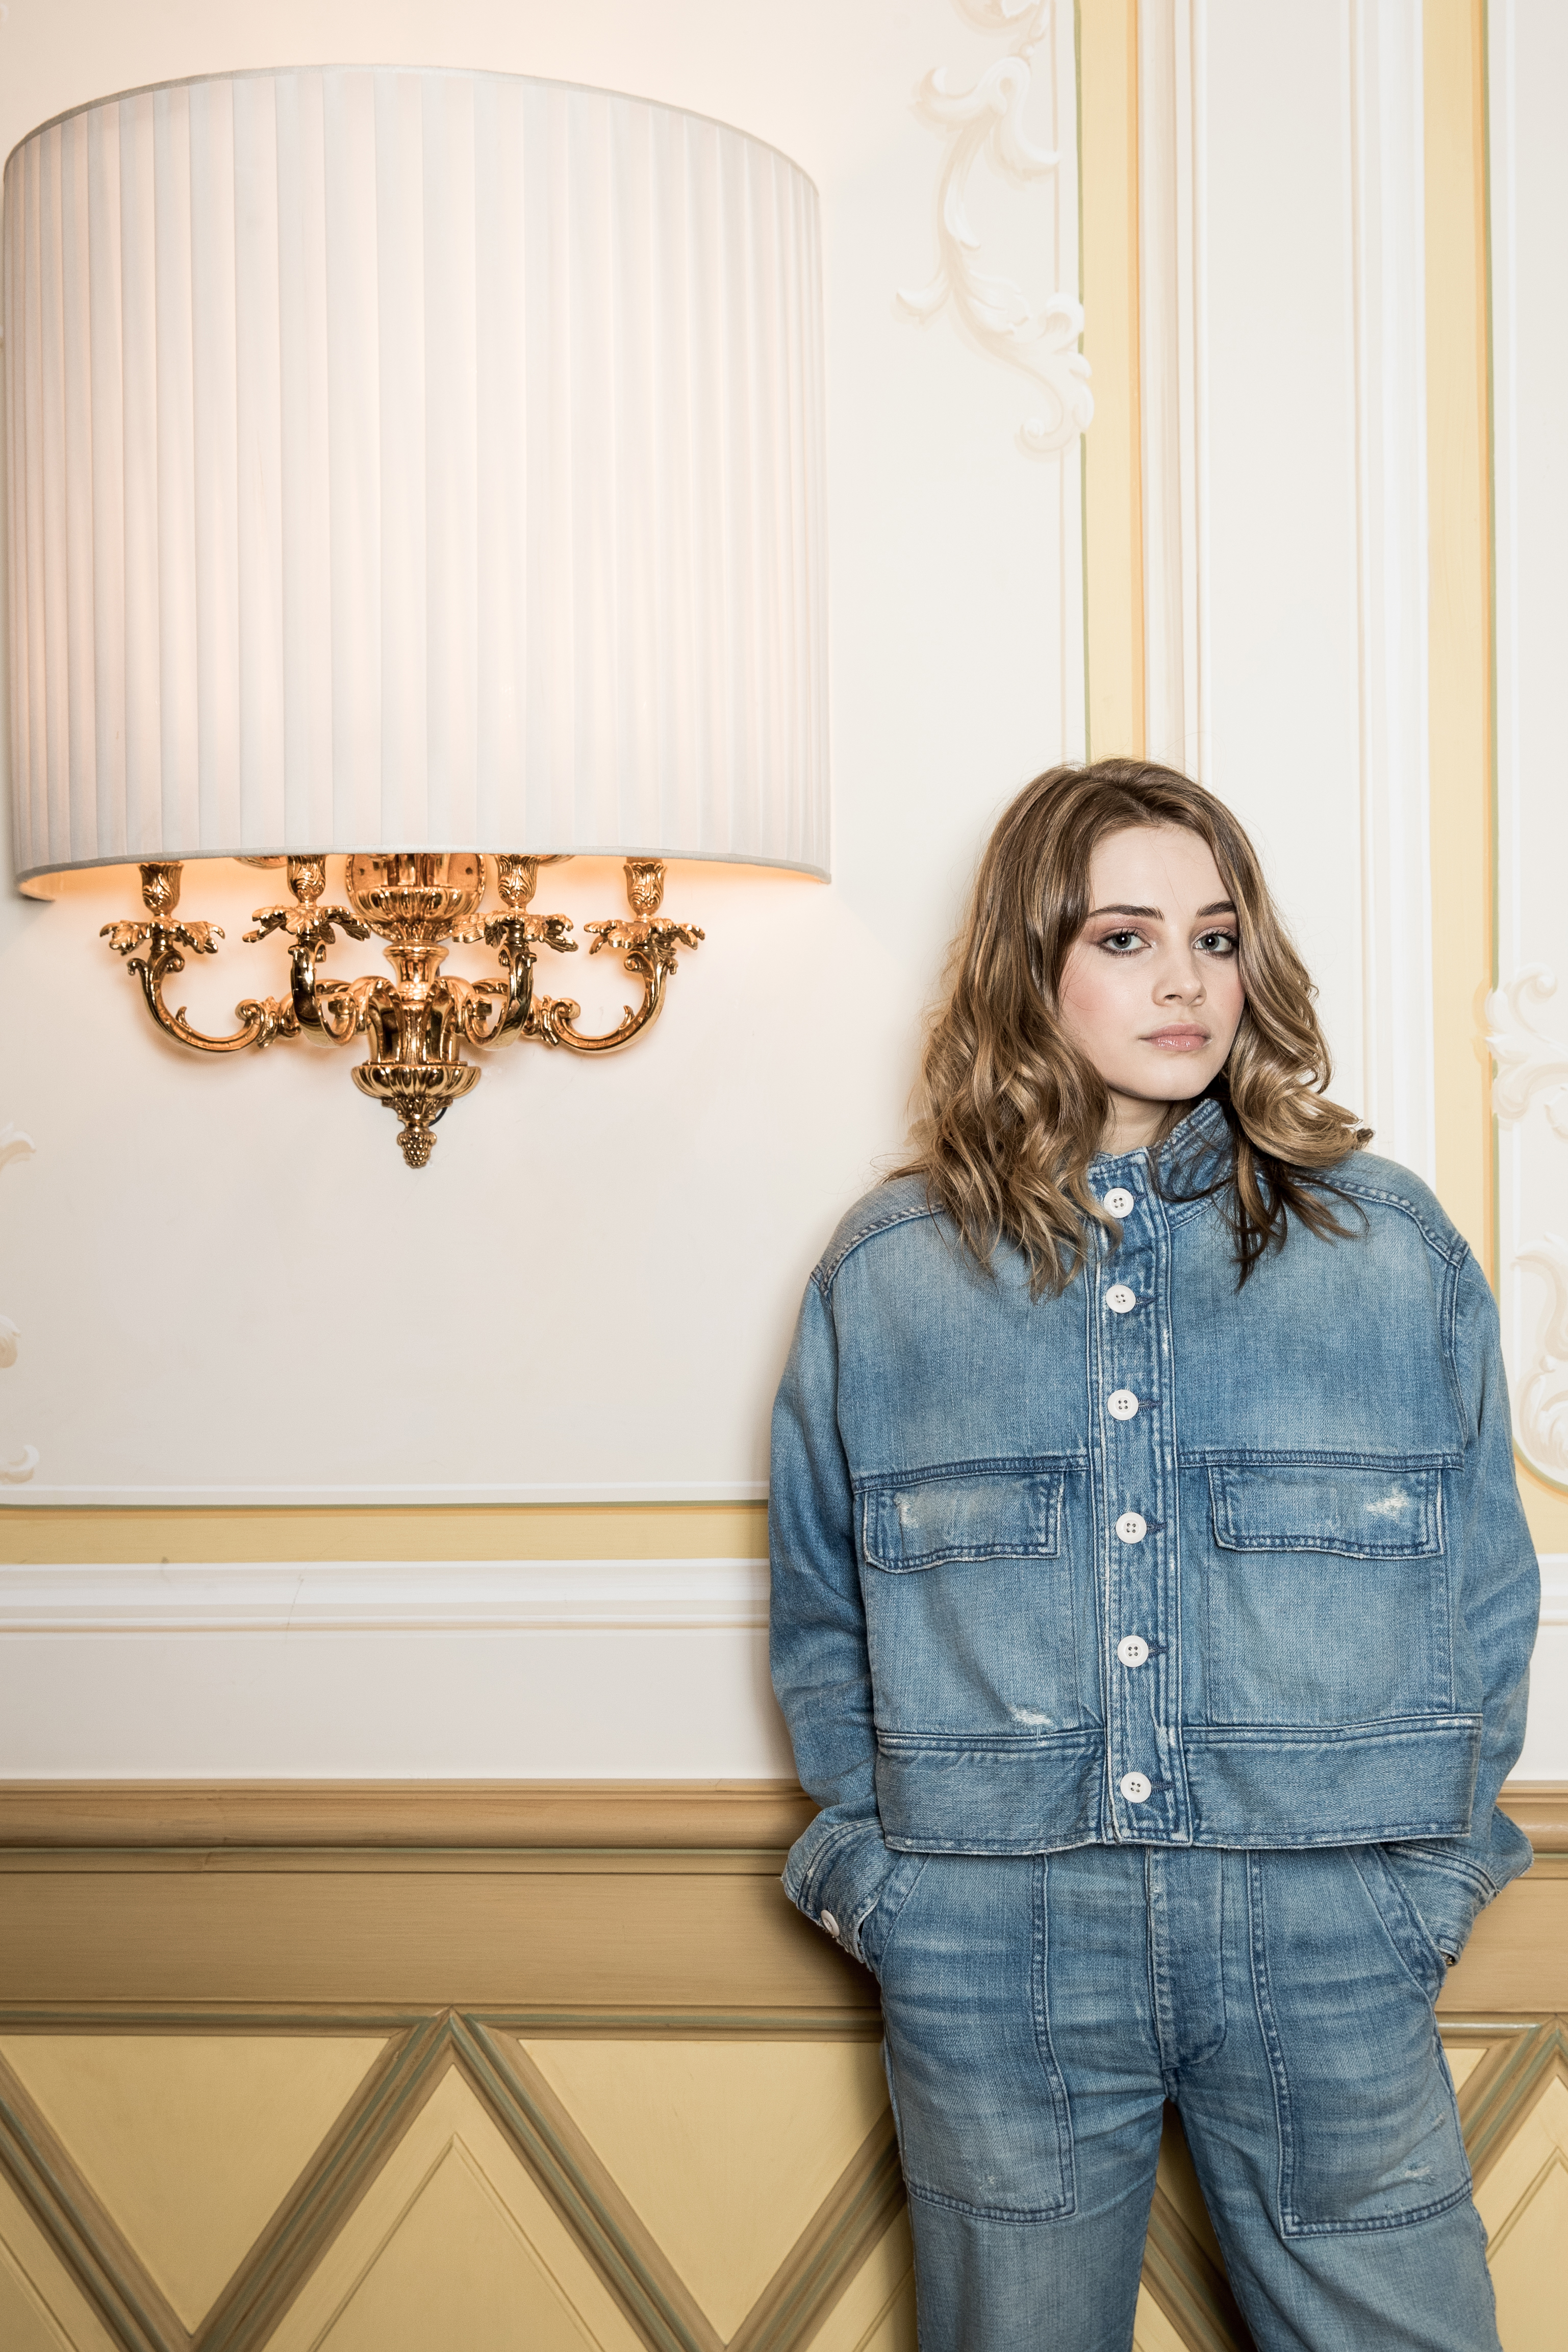 Josephine Langford poses for a portrait on March 29, 2019, in Milan, Italy. | Source: Getty Images